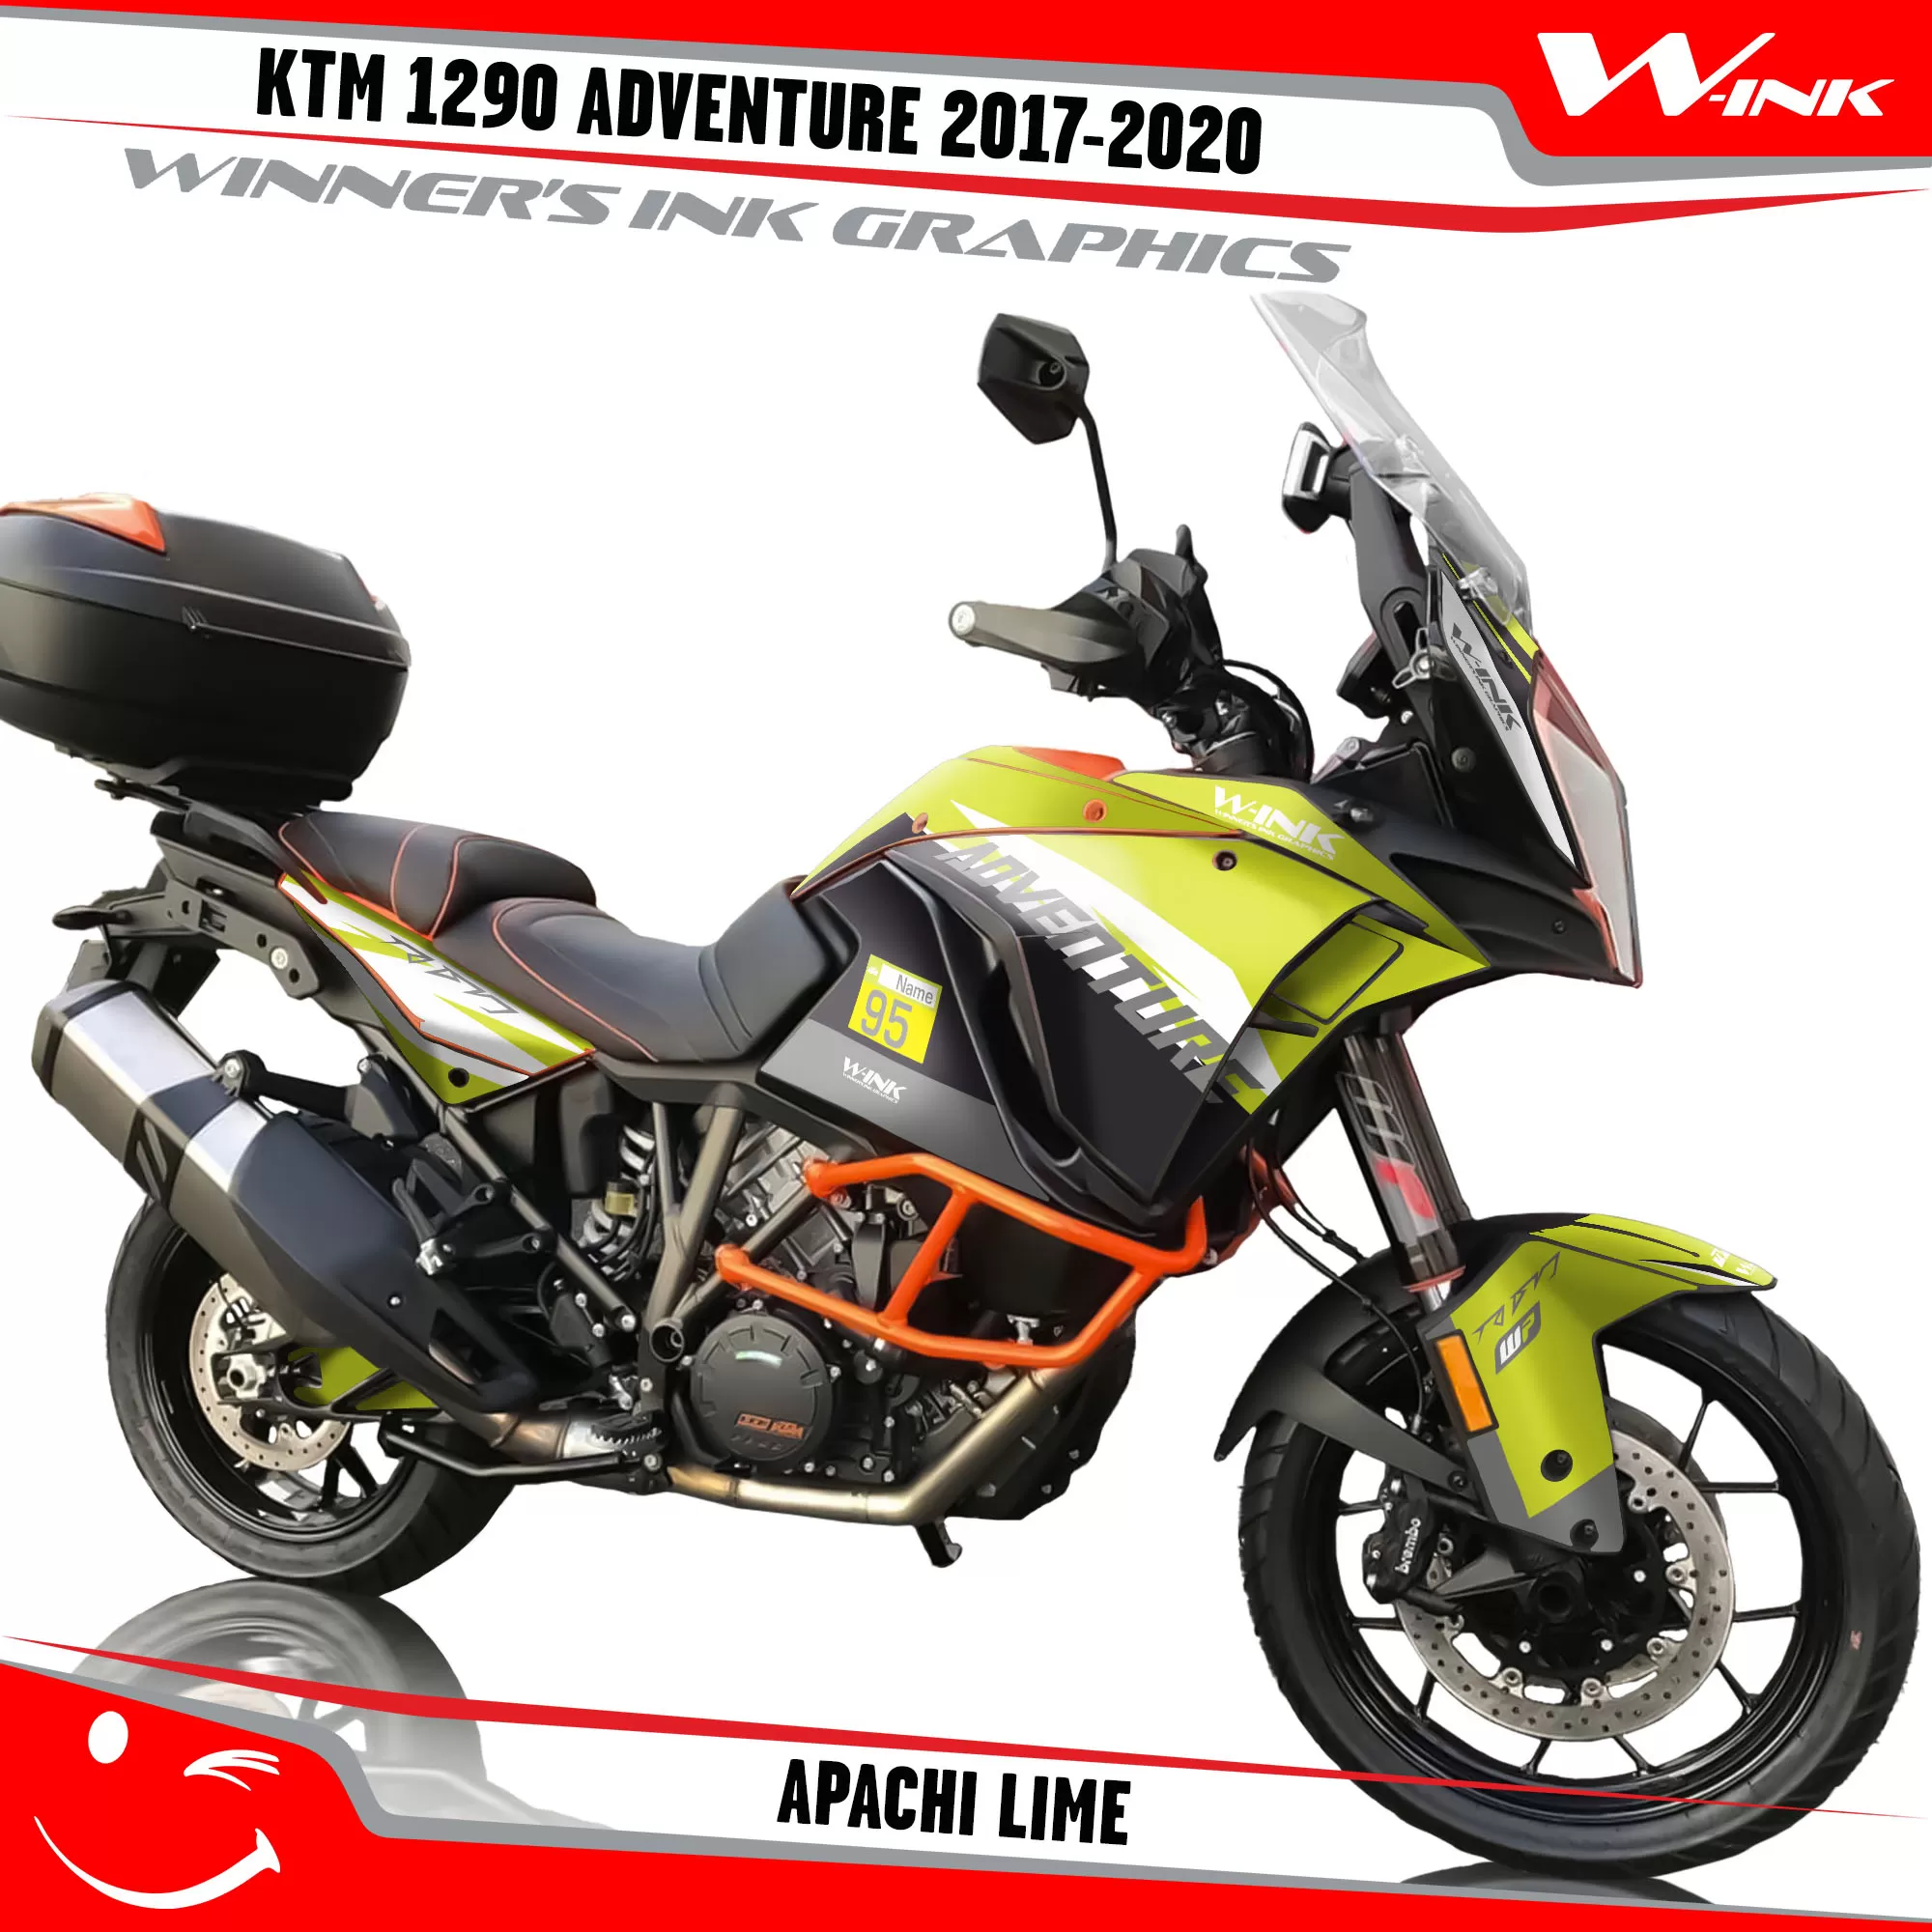 KTM-Adventure-1290-2017-2018-2019-2020-graphics-kit-and-decals-Apachi-Lime